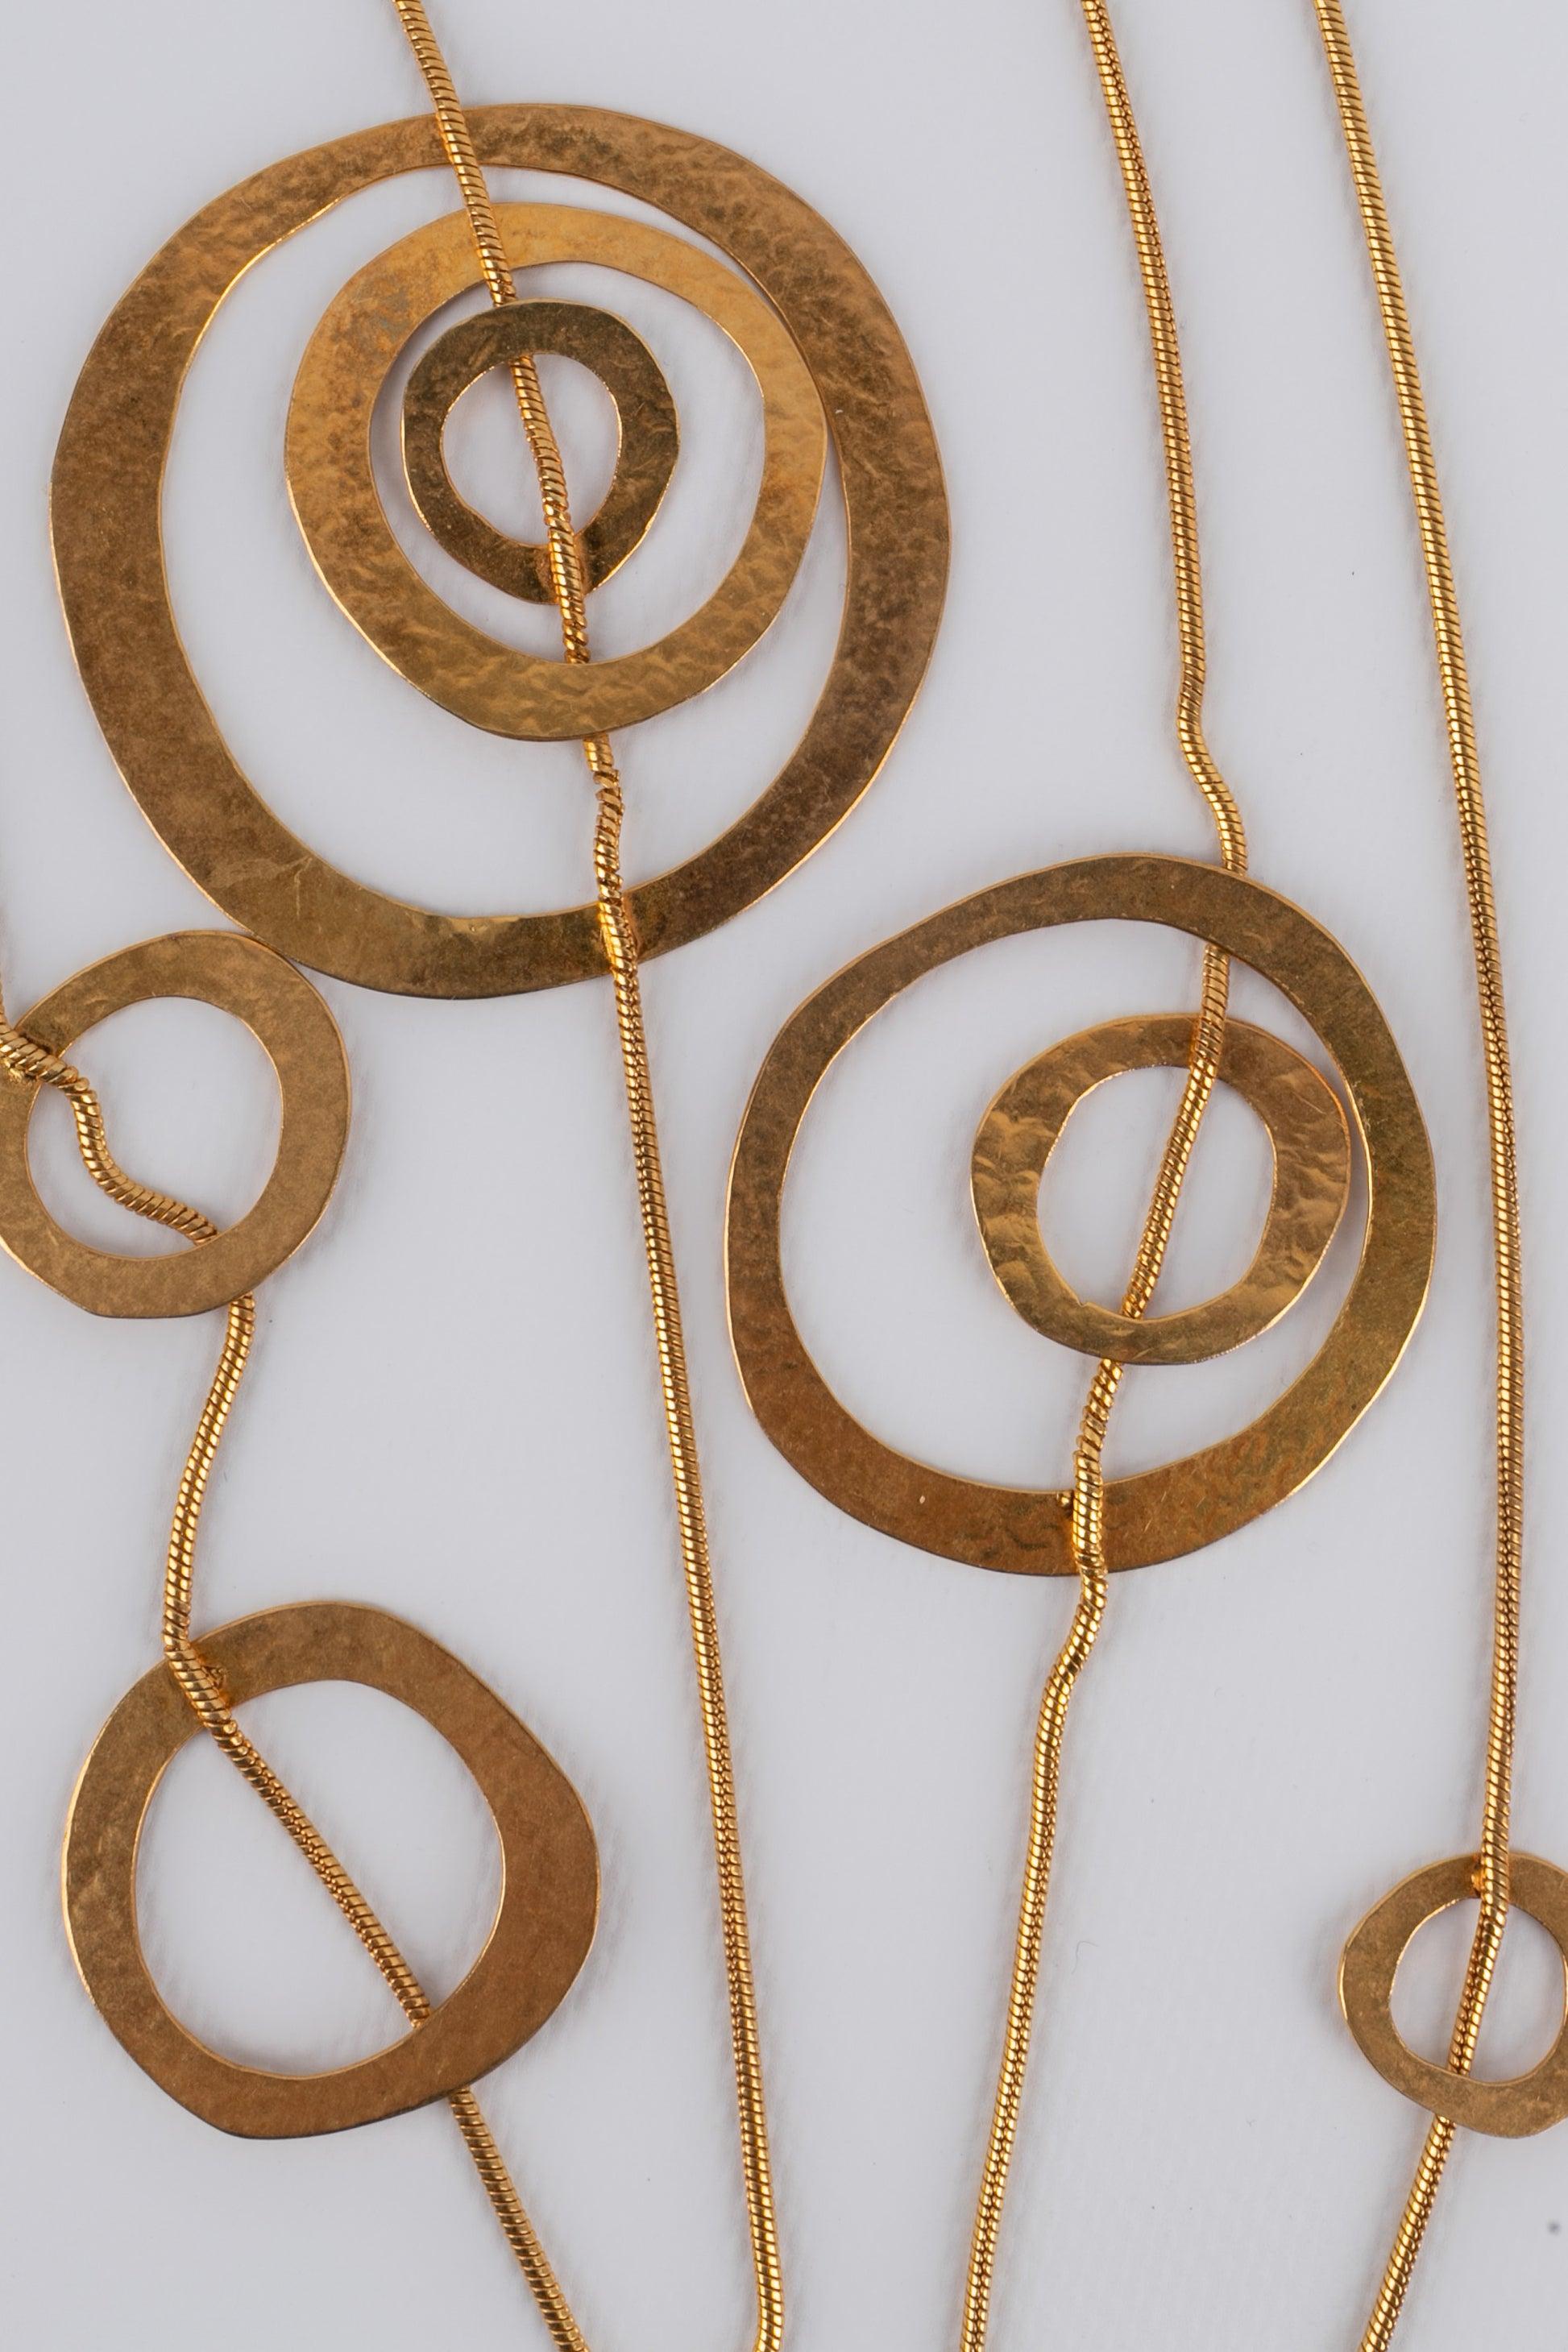 Van Der Straeten - Golden beaten brass necklace with discs. Jewelry from the beginning of the 2000s.

Additional information:
Condition: Very good condition
Dimensions: Length: from 116 cm to 120 cm
Period: 21st Century

Seller Reference: BC115